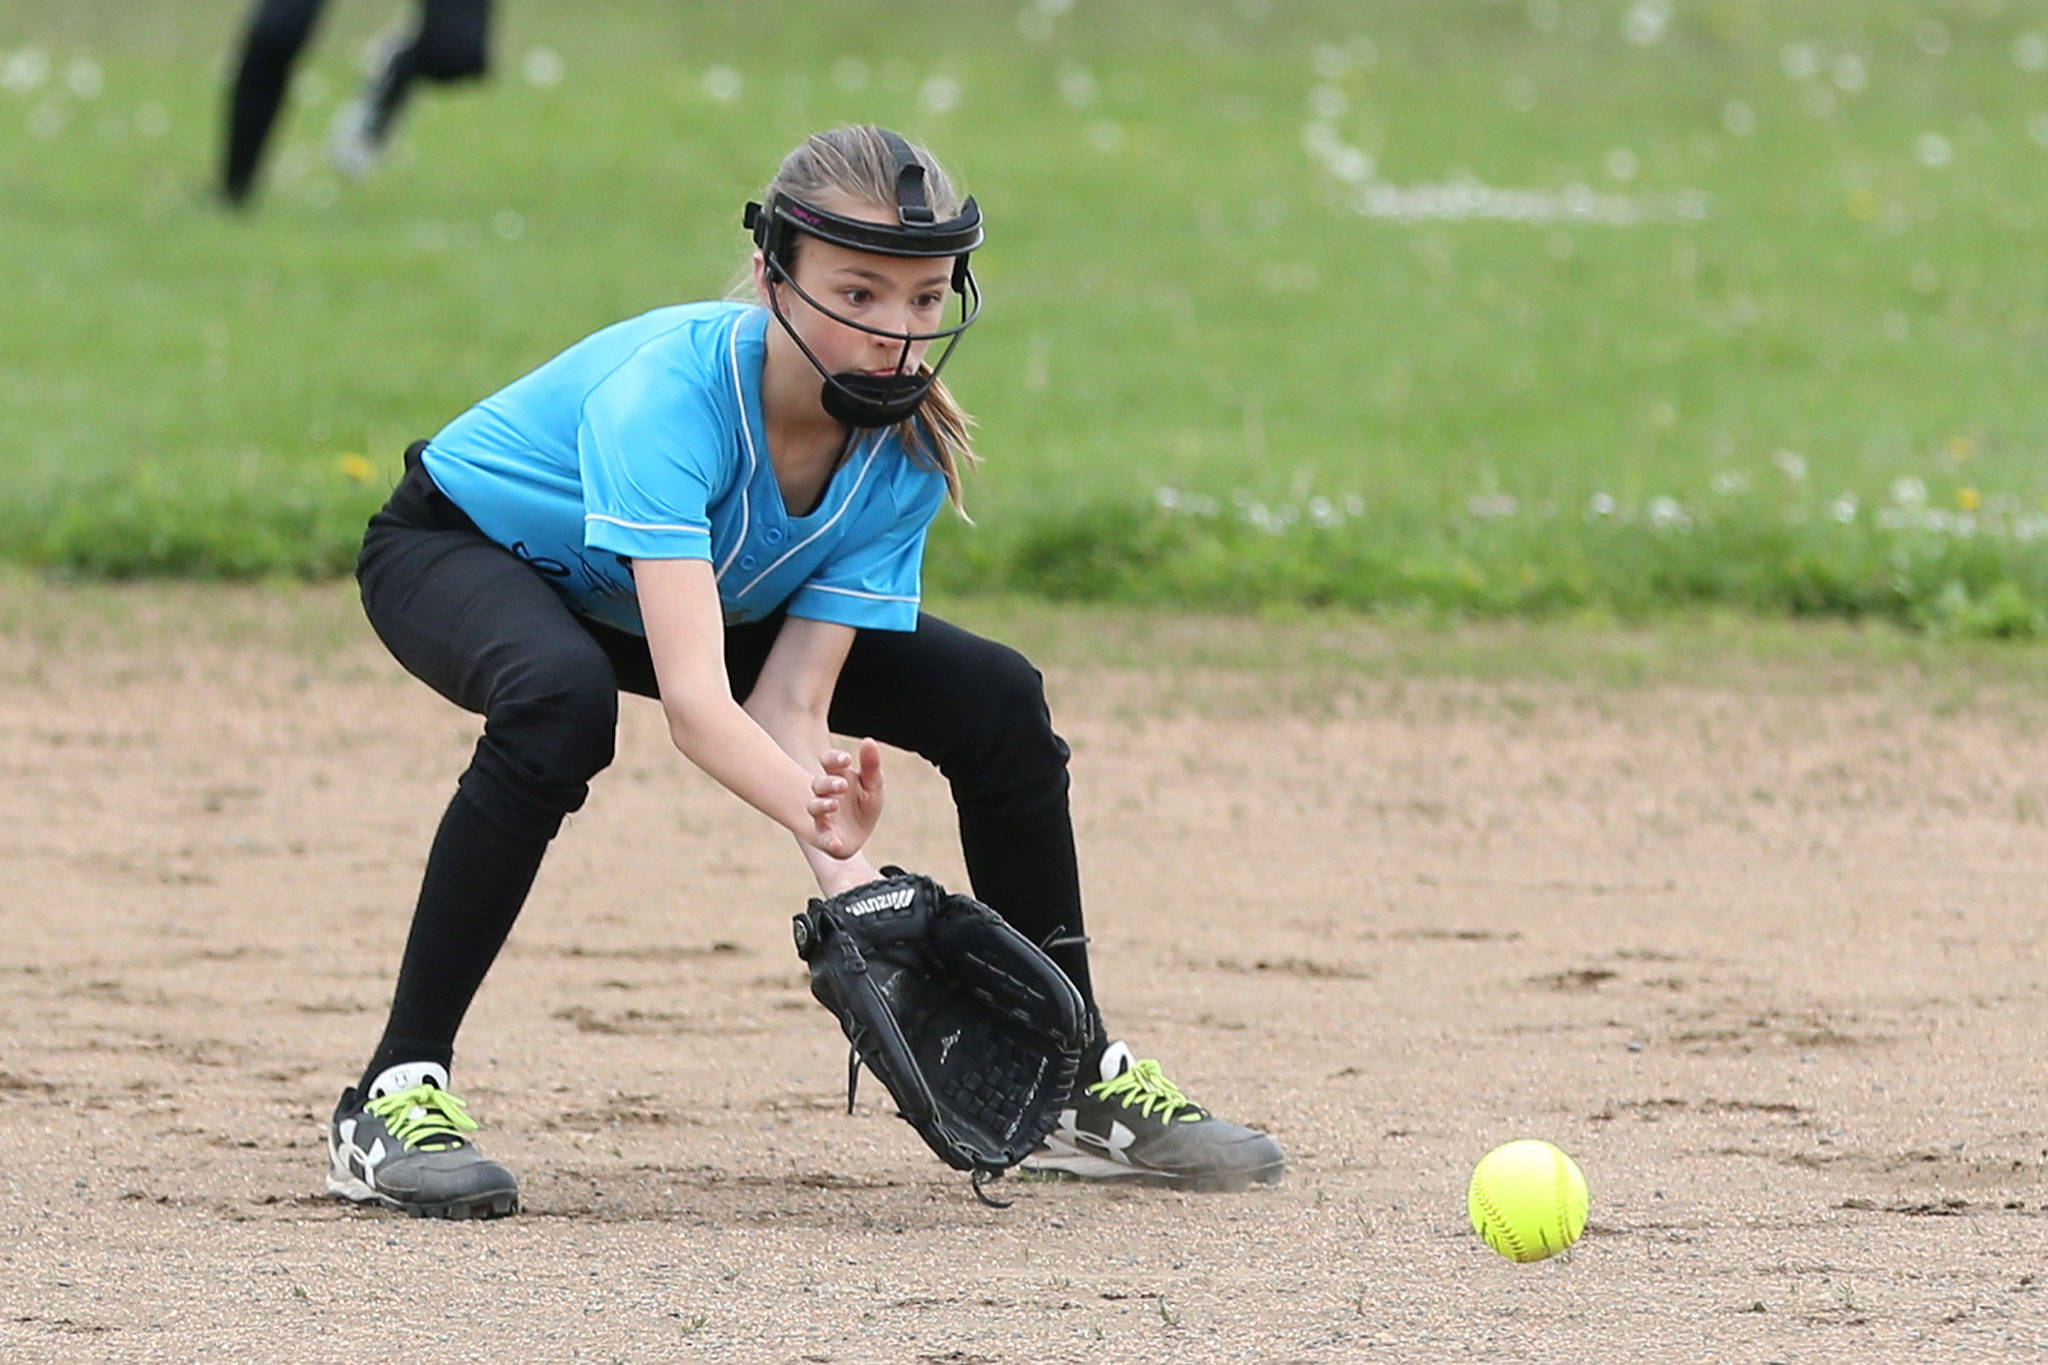 Central Whidbey’s Stella Johnson scoops up a grounder. (Photo by John Fisken)